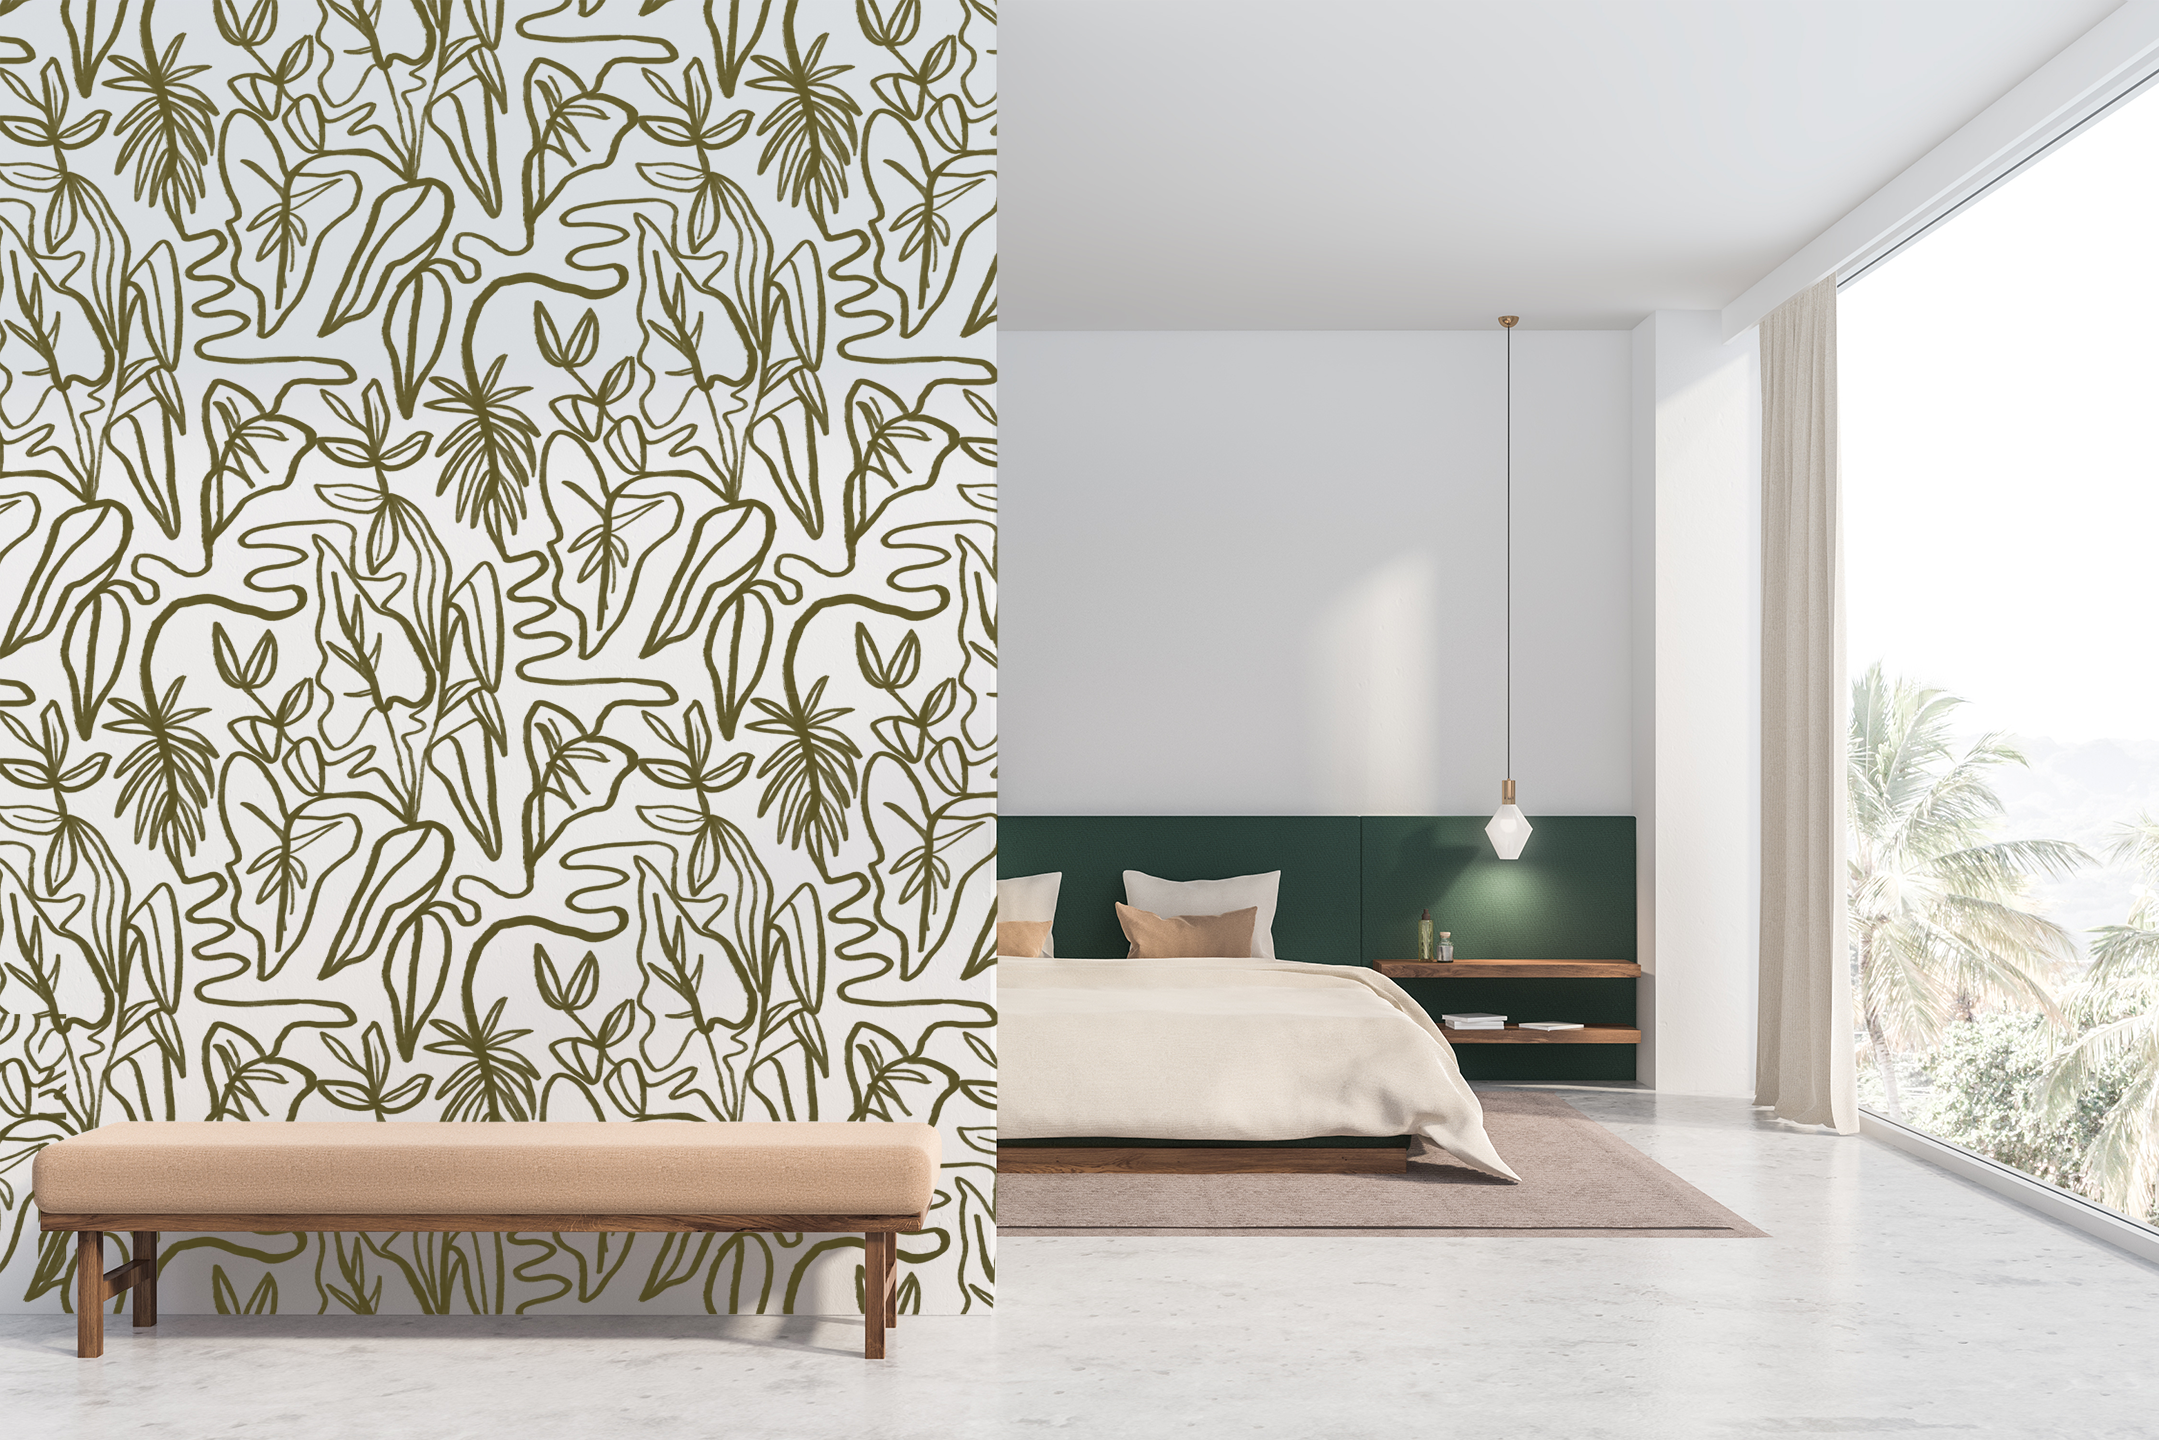 Sunrise Floral Removable Fabric Wallpaper - Peel and Stick! by Samantha  Santana Wallpaper & Home | Wescover Wall Treatments